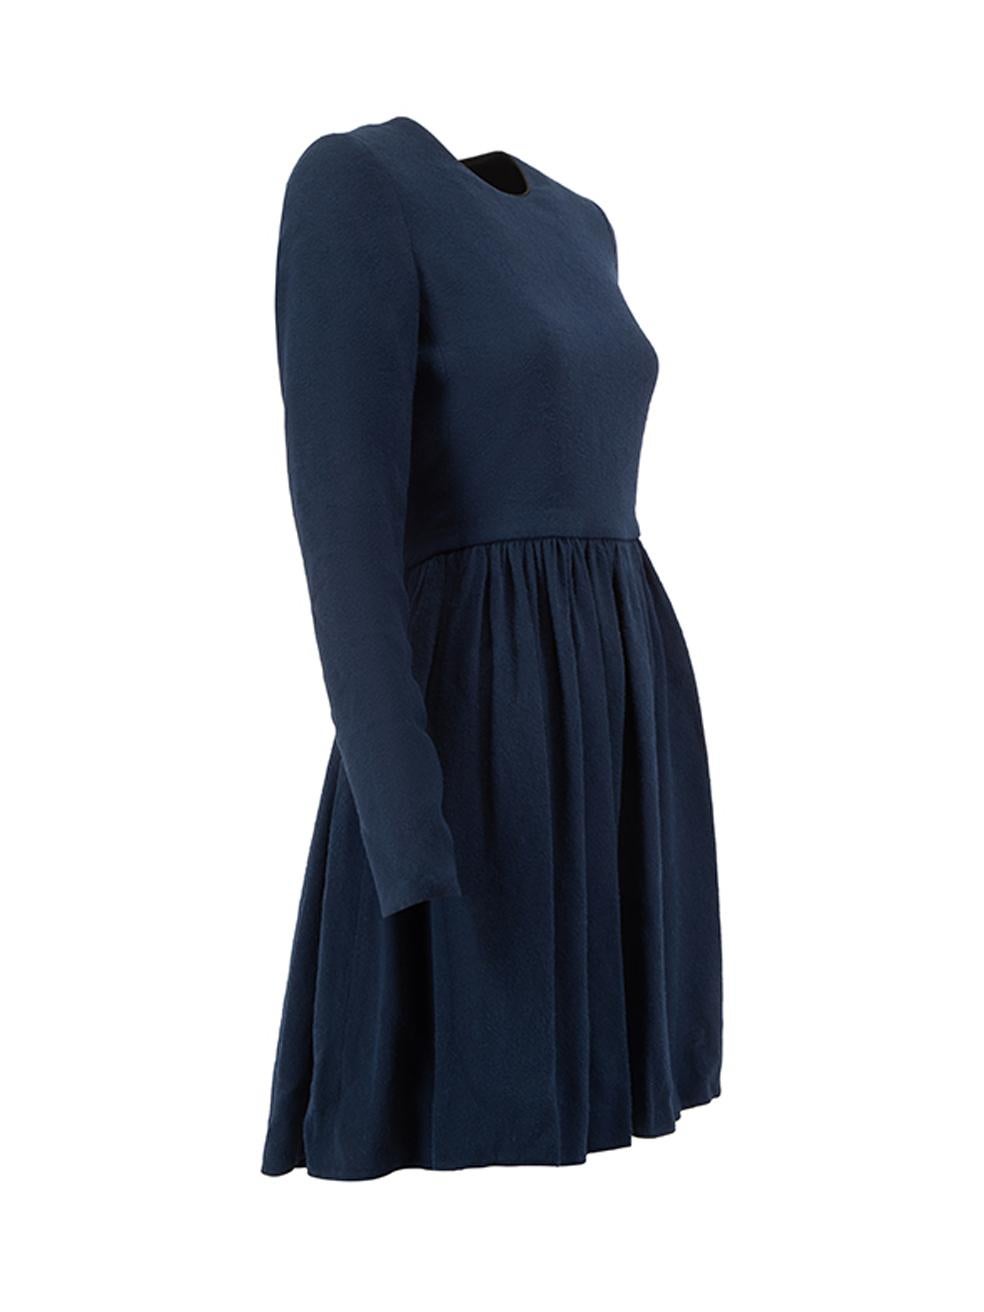 CONDITION is Very good. Hardly any visible wear to dress is evident on this used Victoria Beckham designer resale item.   Details  Navy Viscose Mini dress Round neckline Buttoned cuffs Open back with drawstring and button closure on neckline High